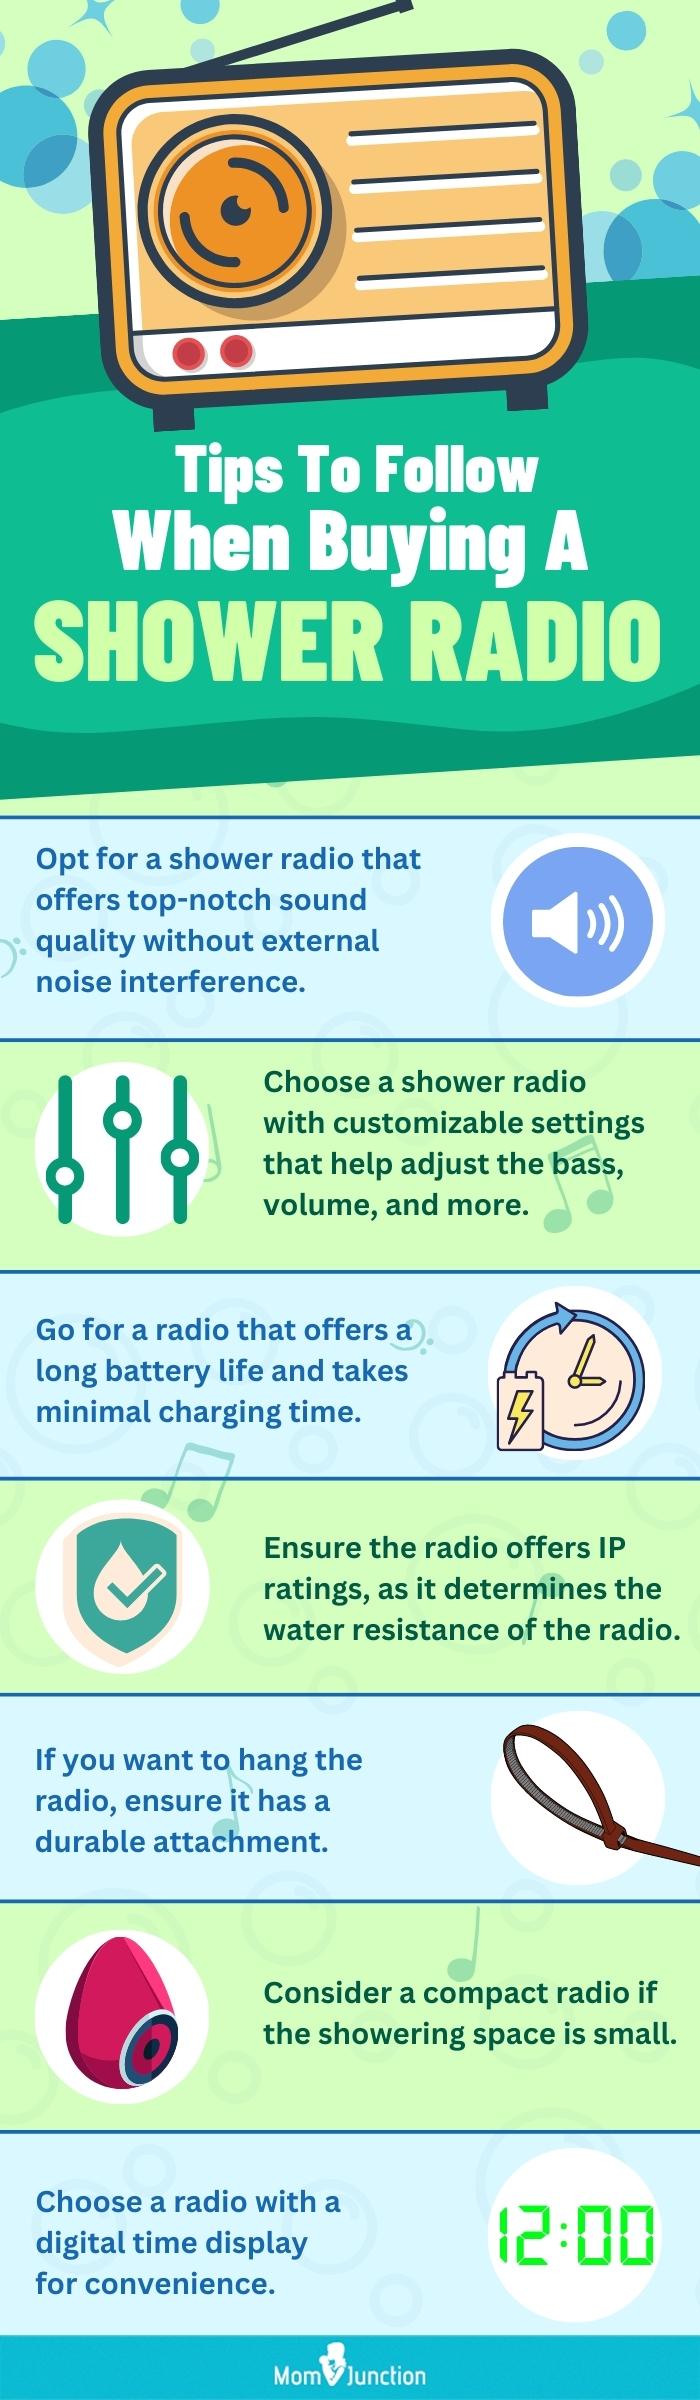 Tips To Follow When Buying A Shower Radio 302 Content topics (Infographic)